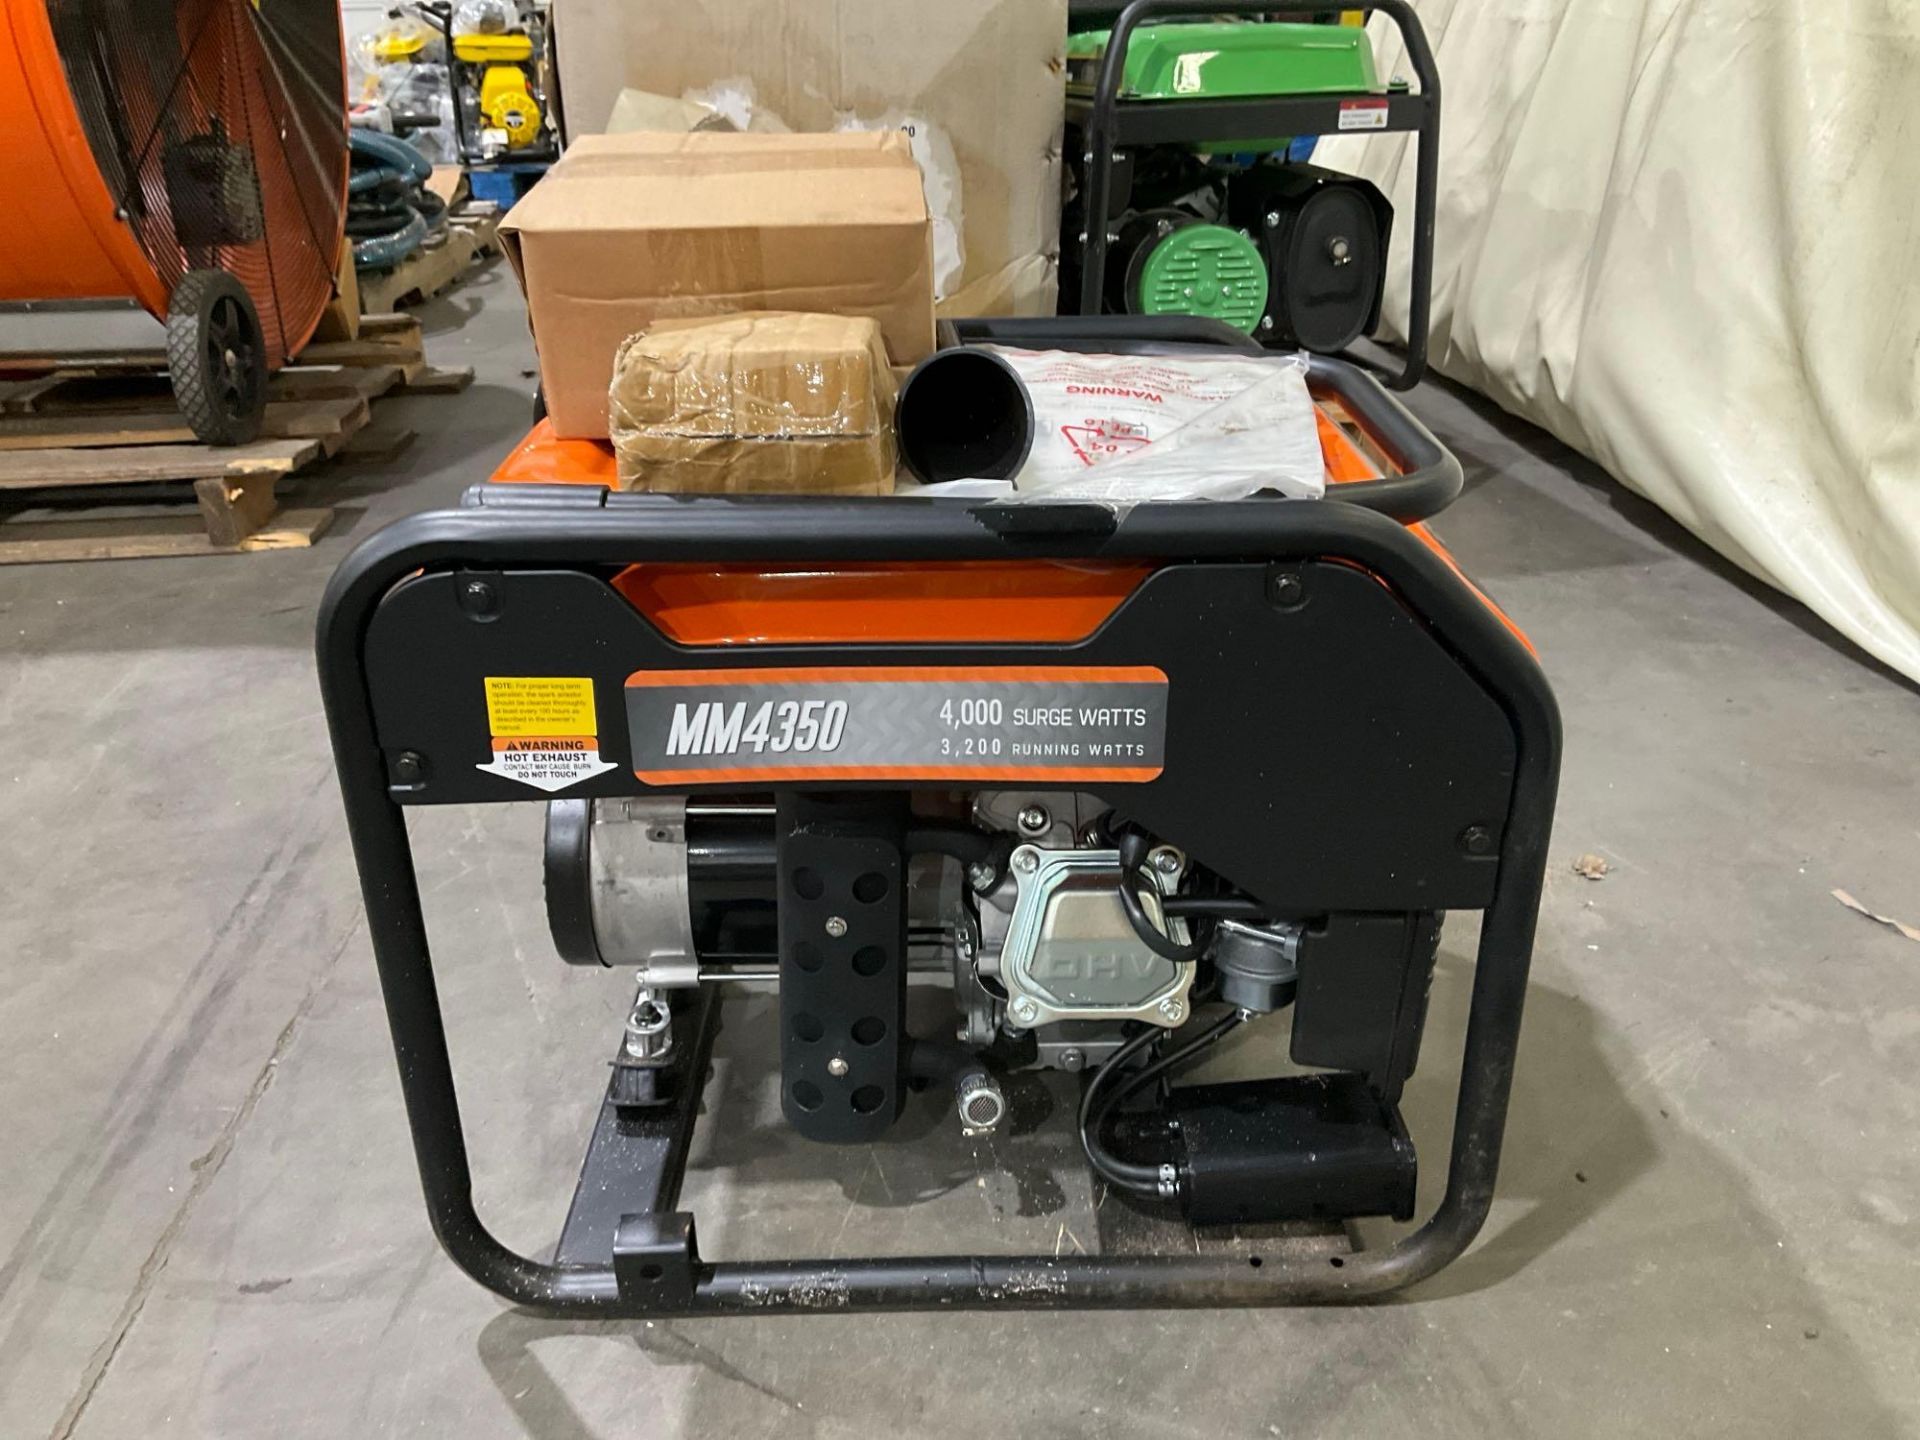 UNUSED MECH MARVELS MM4350 PORTABLE GAS GENERATOR, APPROX 4000 SURGE WATTS - Image 6 of 9